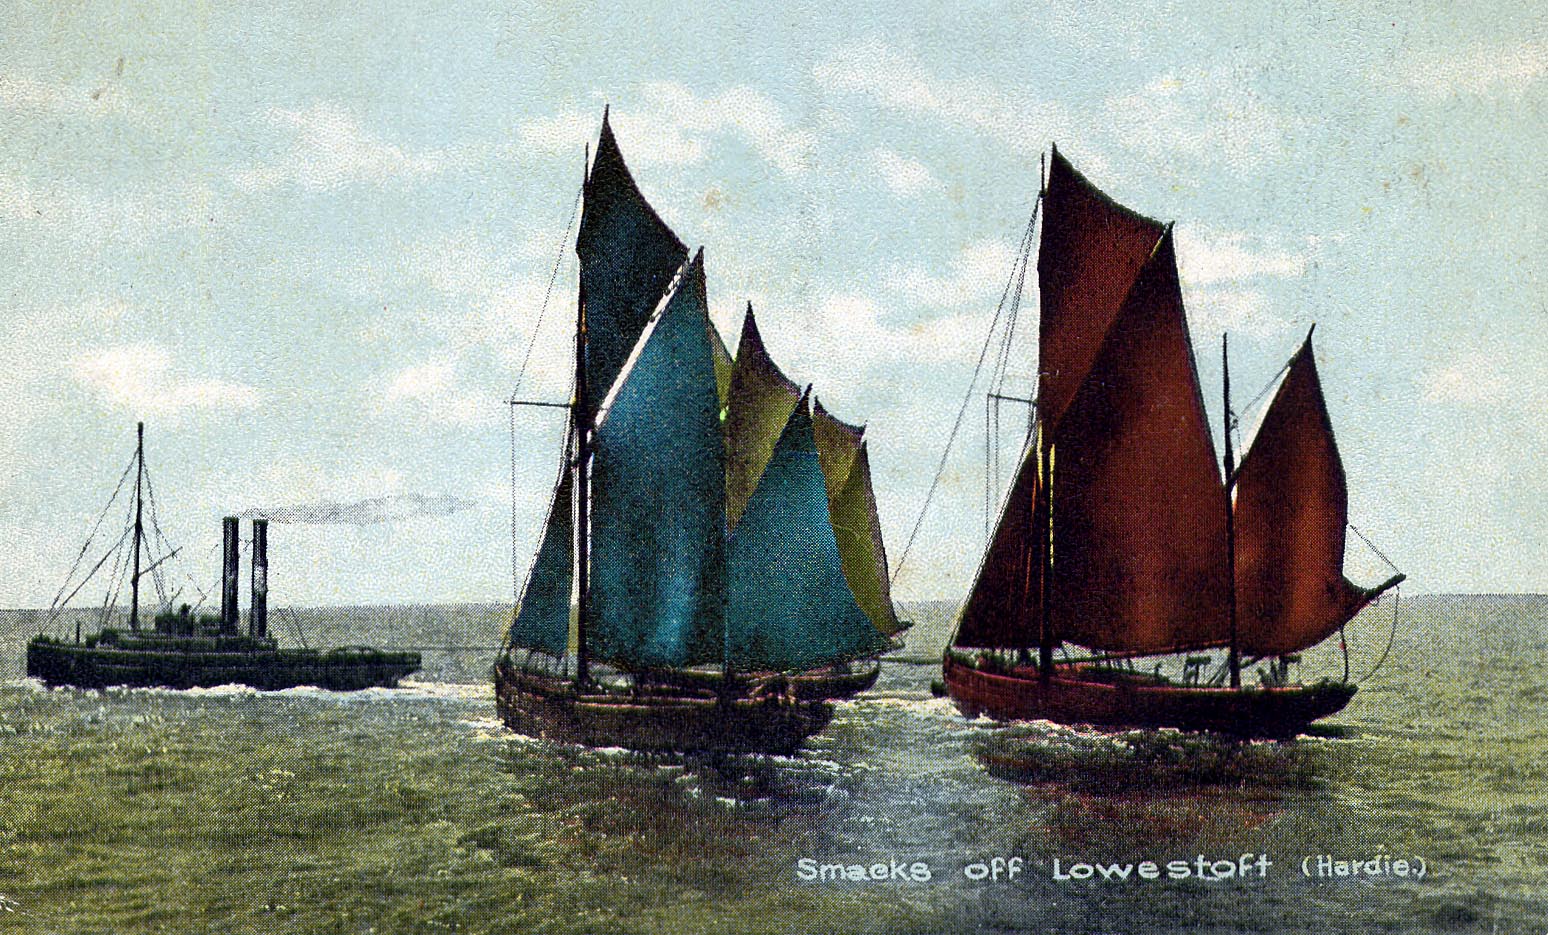 Postcard showing Smacks off Lowestoft towed by steamer